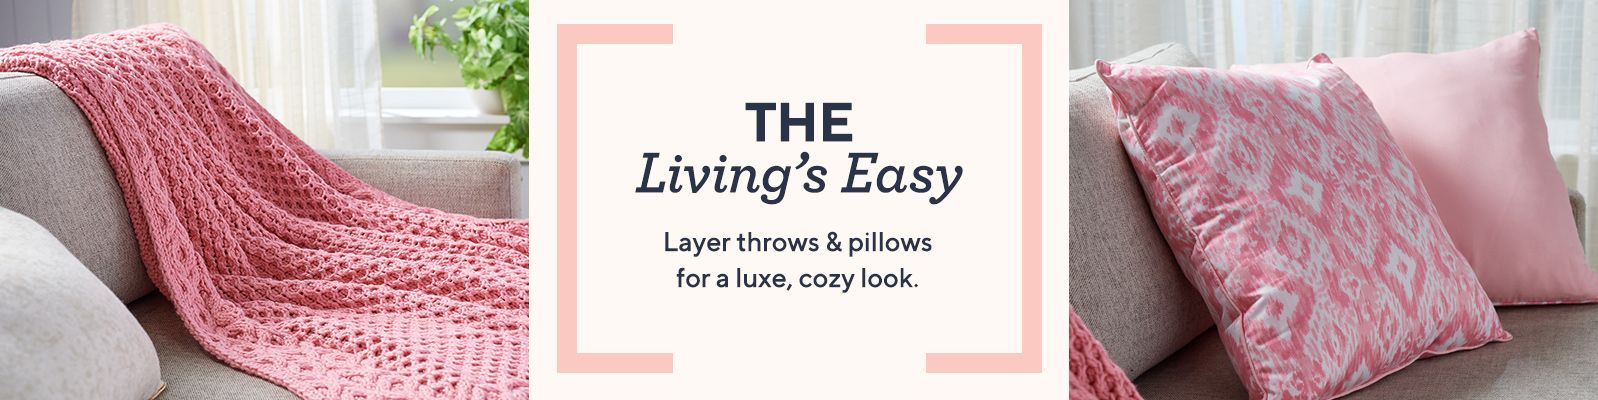 The Living's Easy. Layer throws & pillows for a luxe, cozy look.